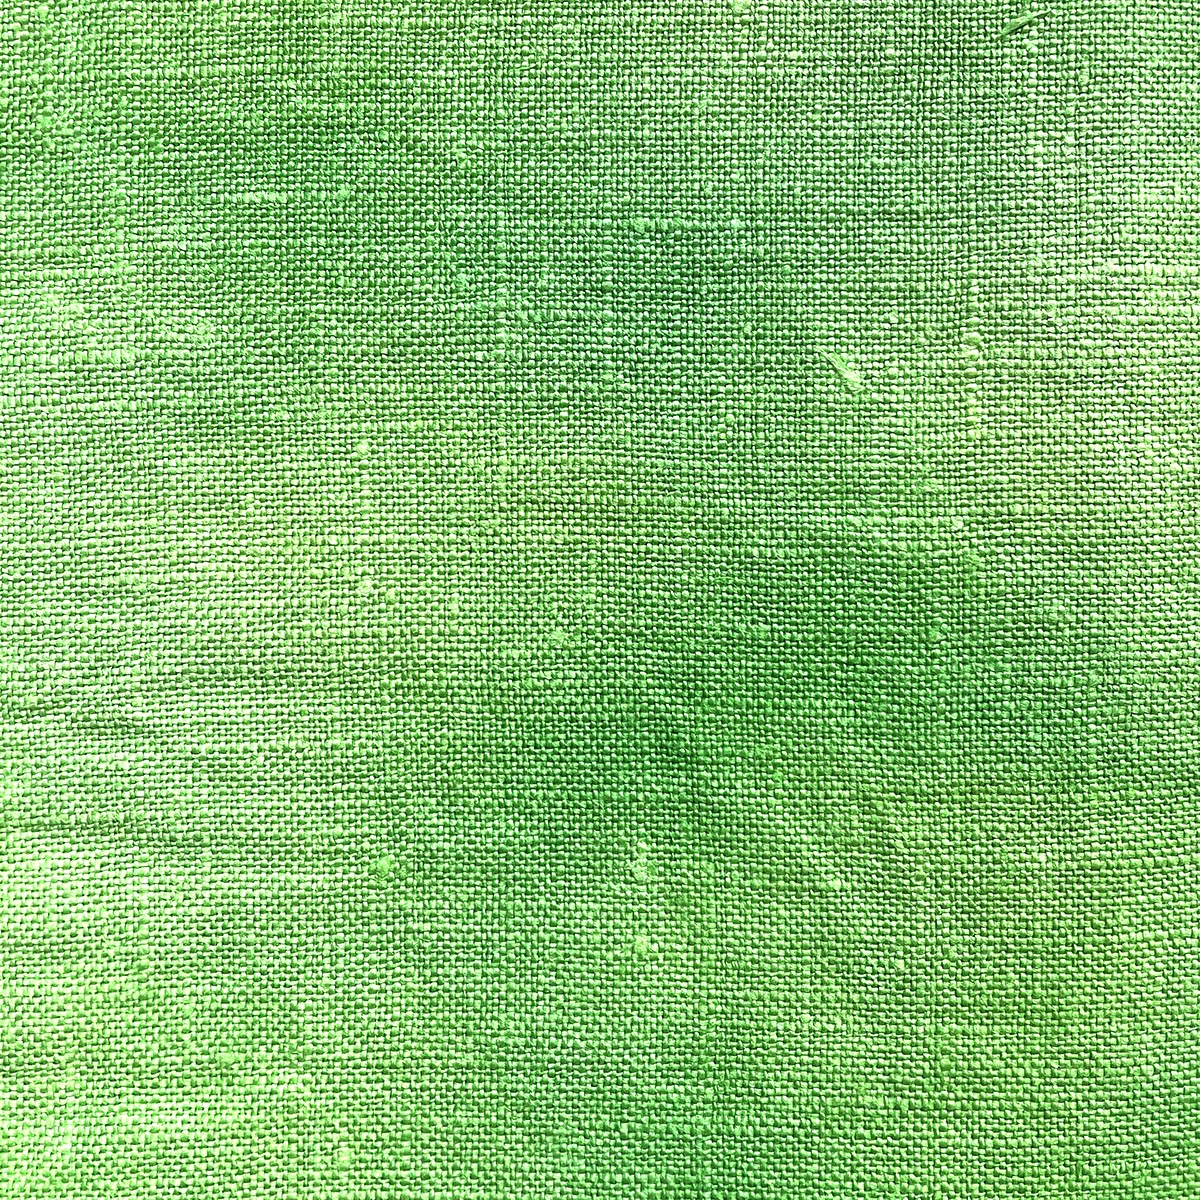 www.colourstreams.com.au Colour Streams Linen 36 Count Hand Dyed  DL 19 Verde Greens Embroidery Cross Stitch Textile Arts FIbre Embroidery Slow Stitching Counted Meditative Australia